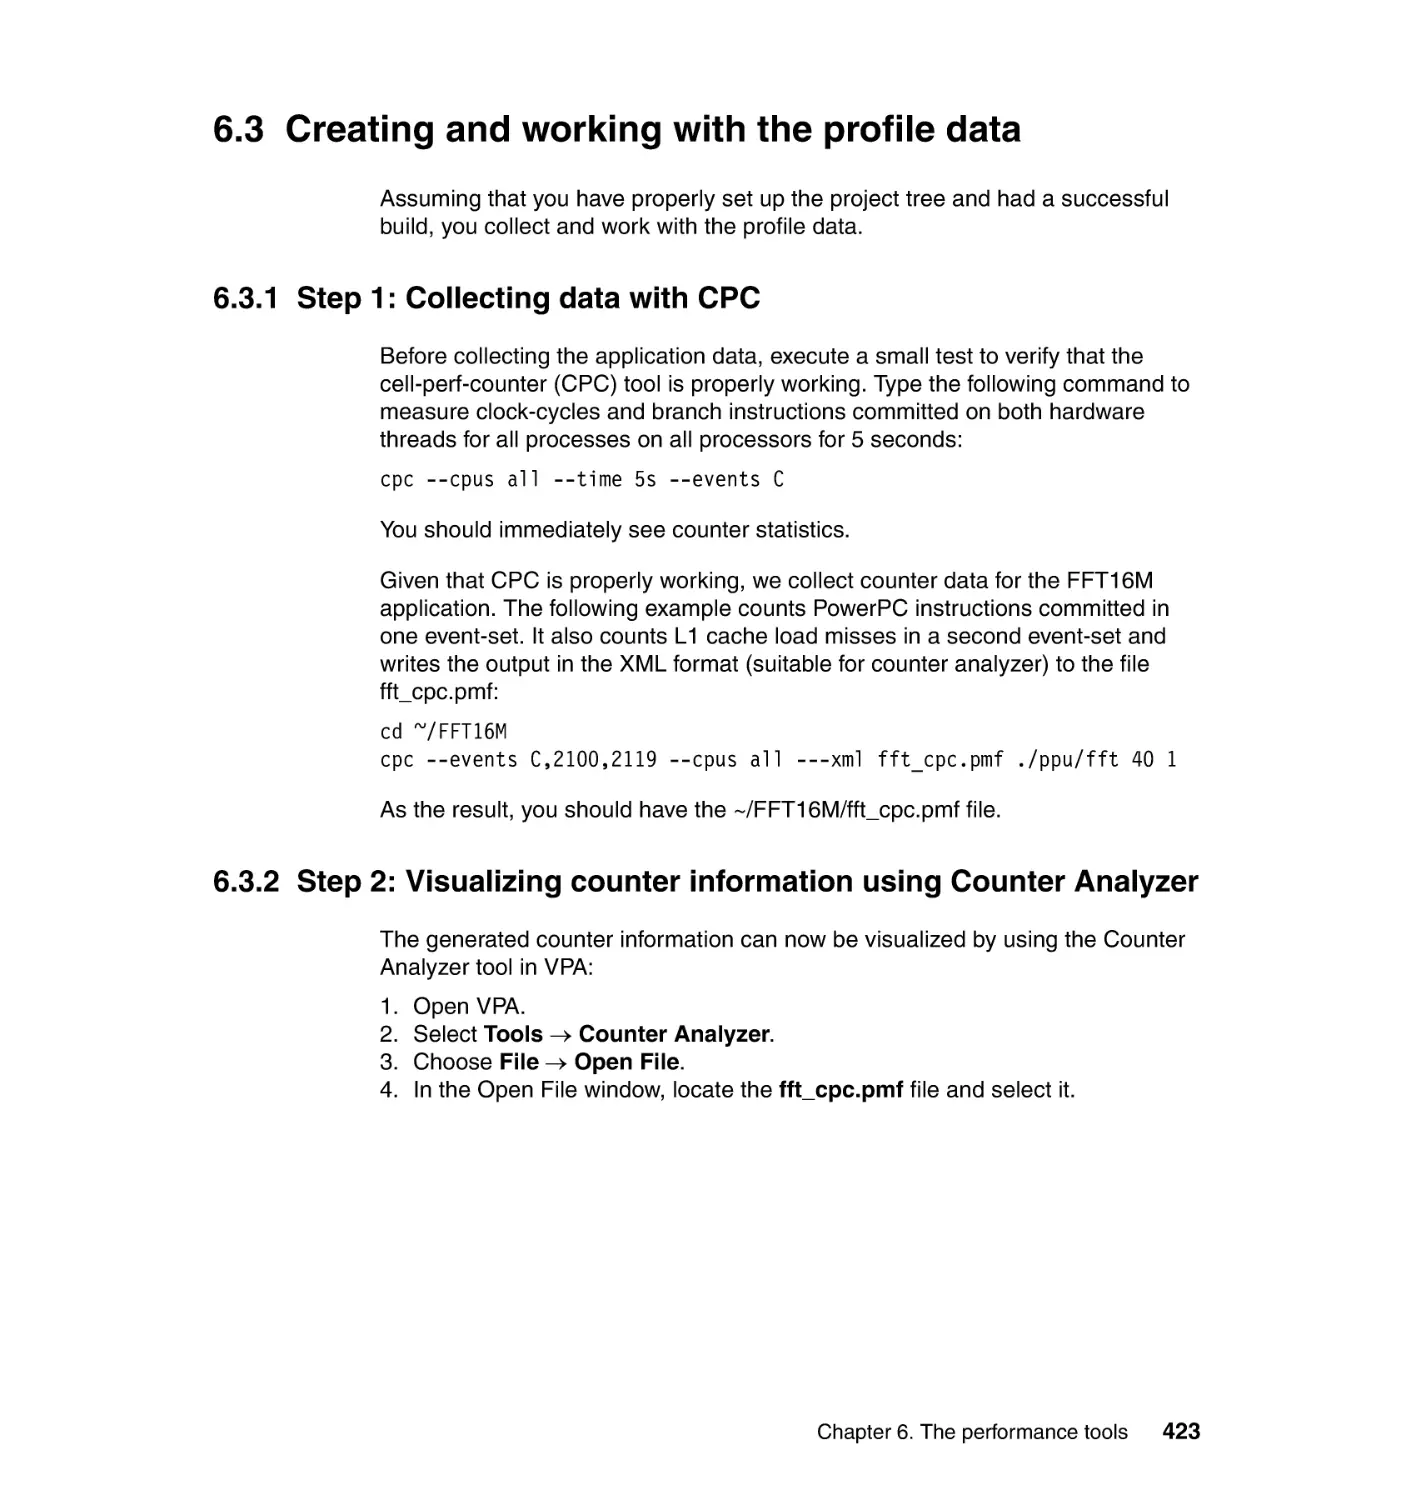 6.3 Creating and working with the profile data
6.3.1 Step 1
6.3.2 Step 2